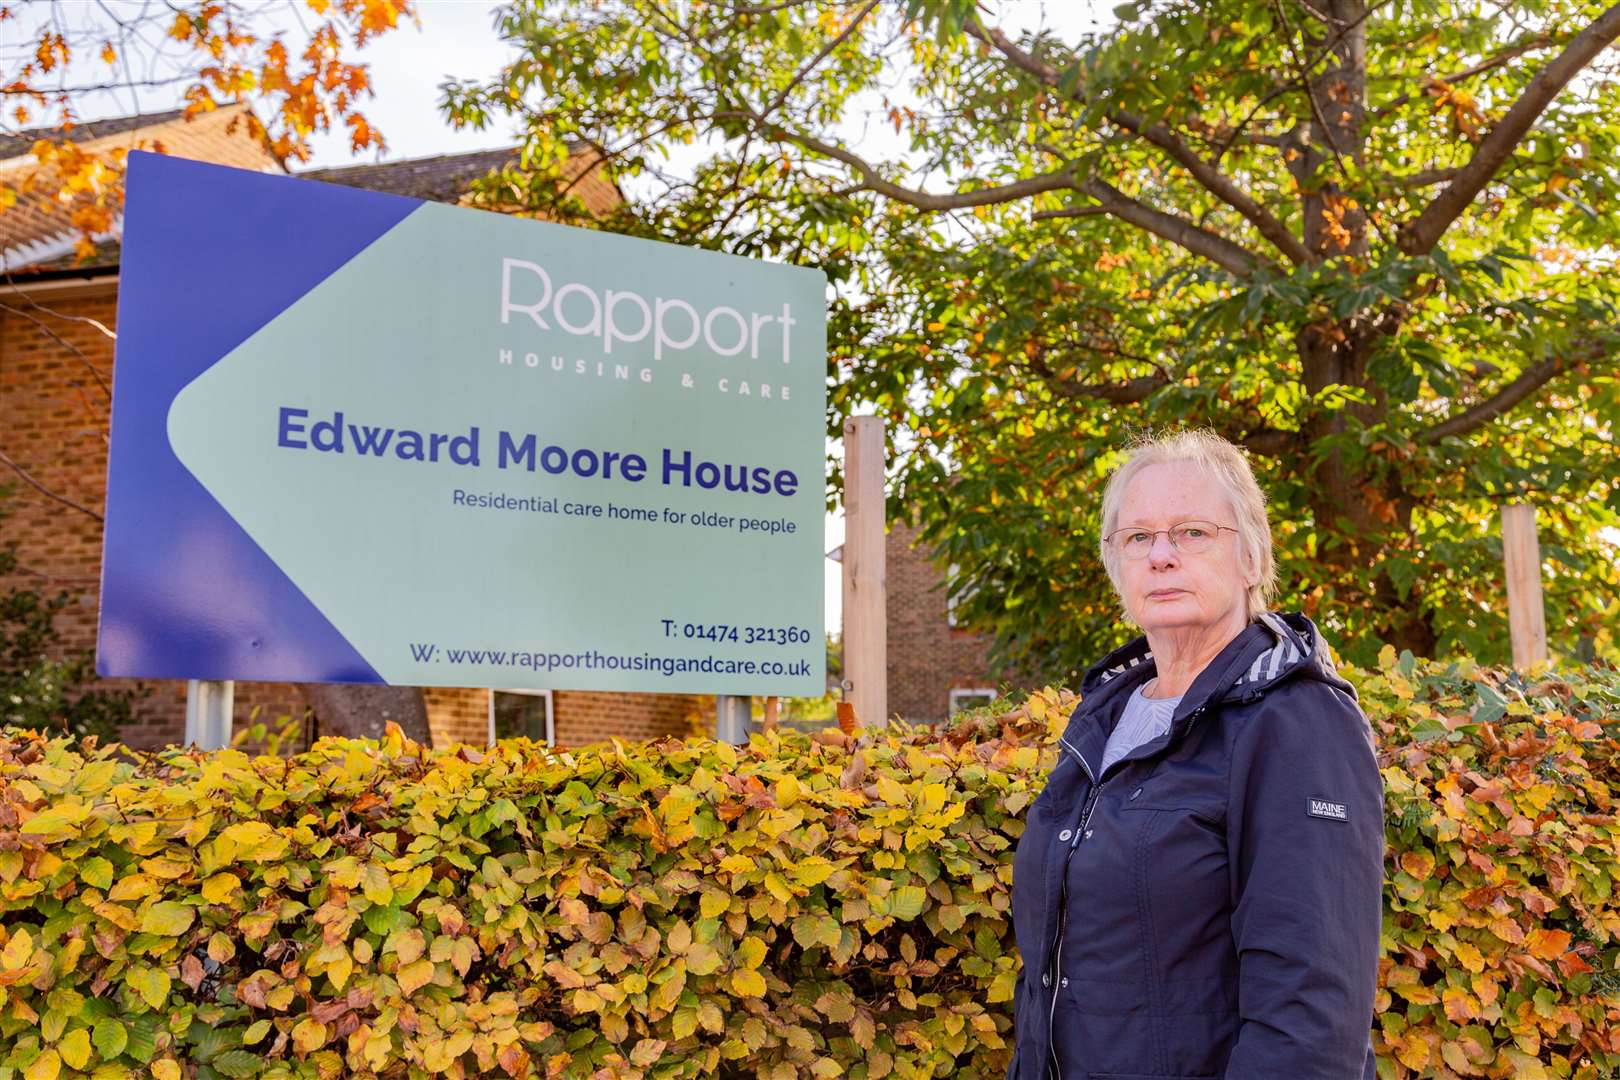 Cllr Lyn Milner, whose mum is a resident at Edward Moore House, found out via social media it was closing